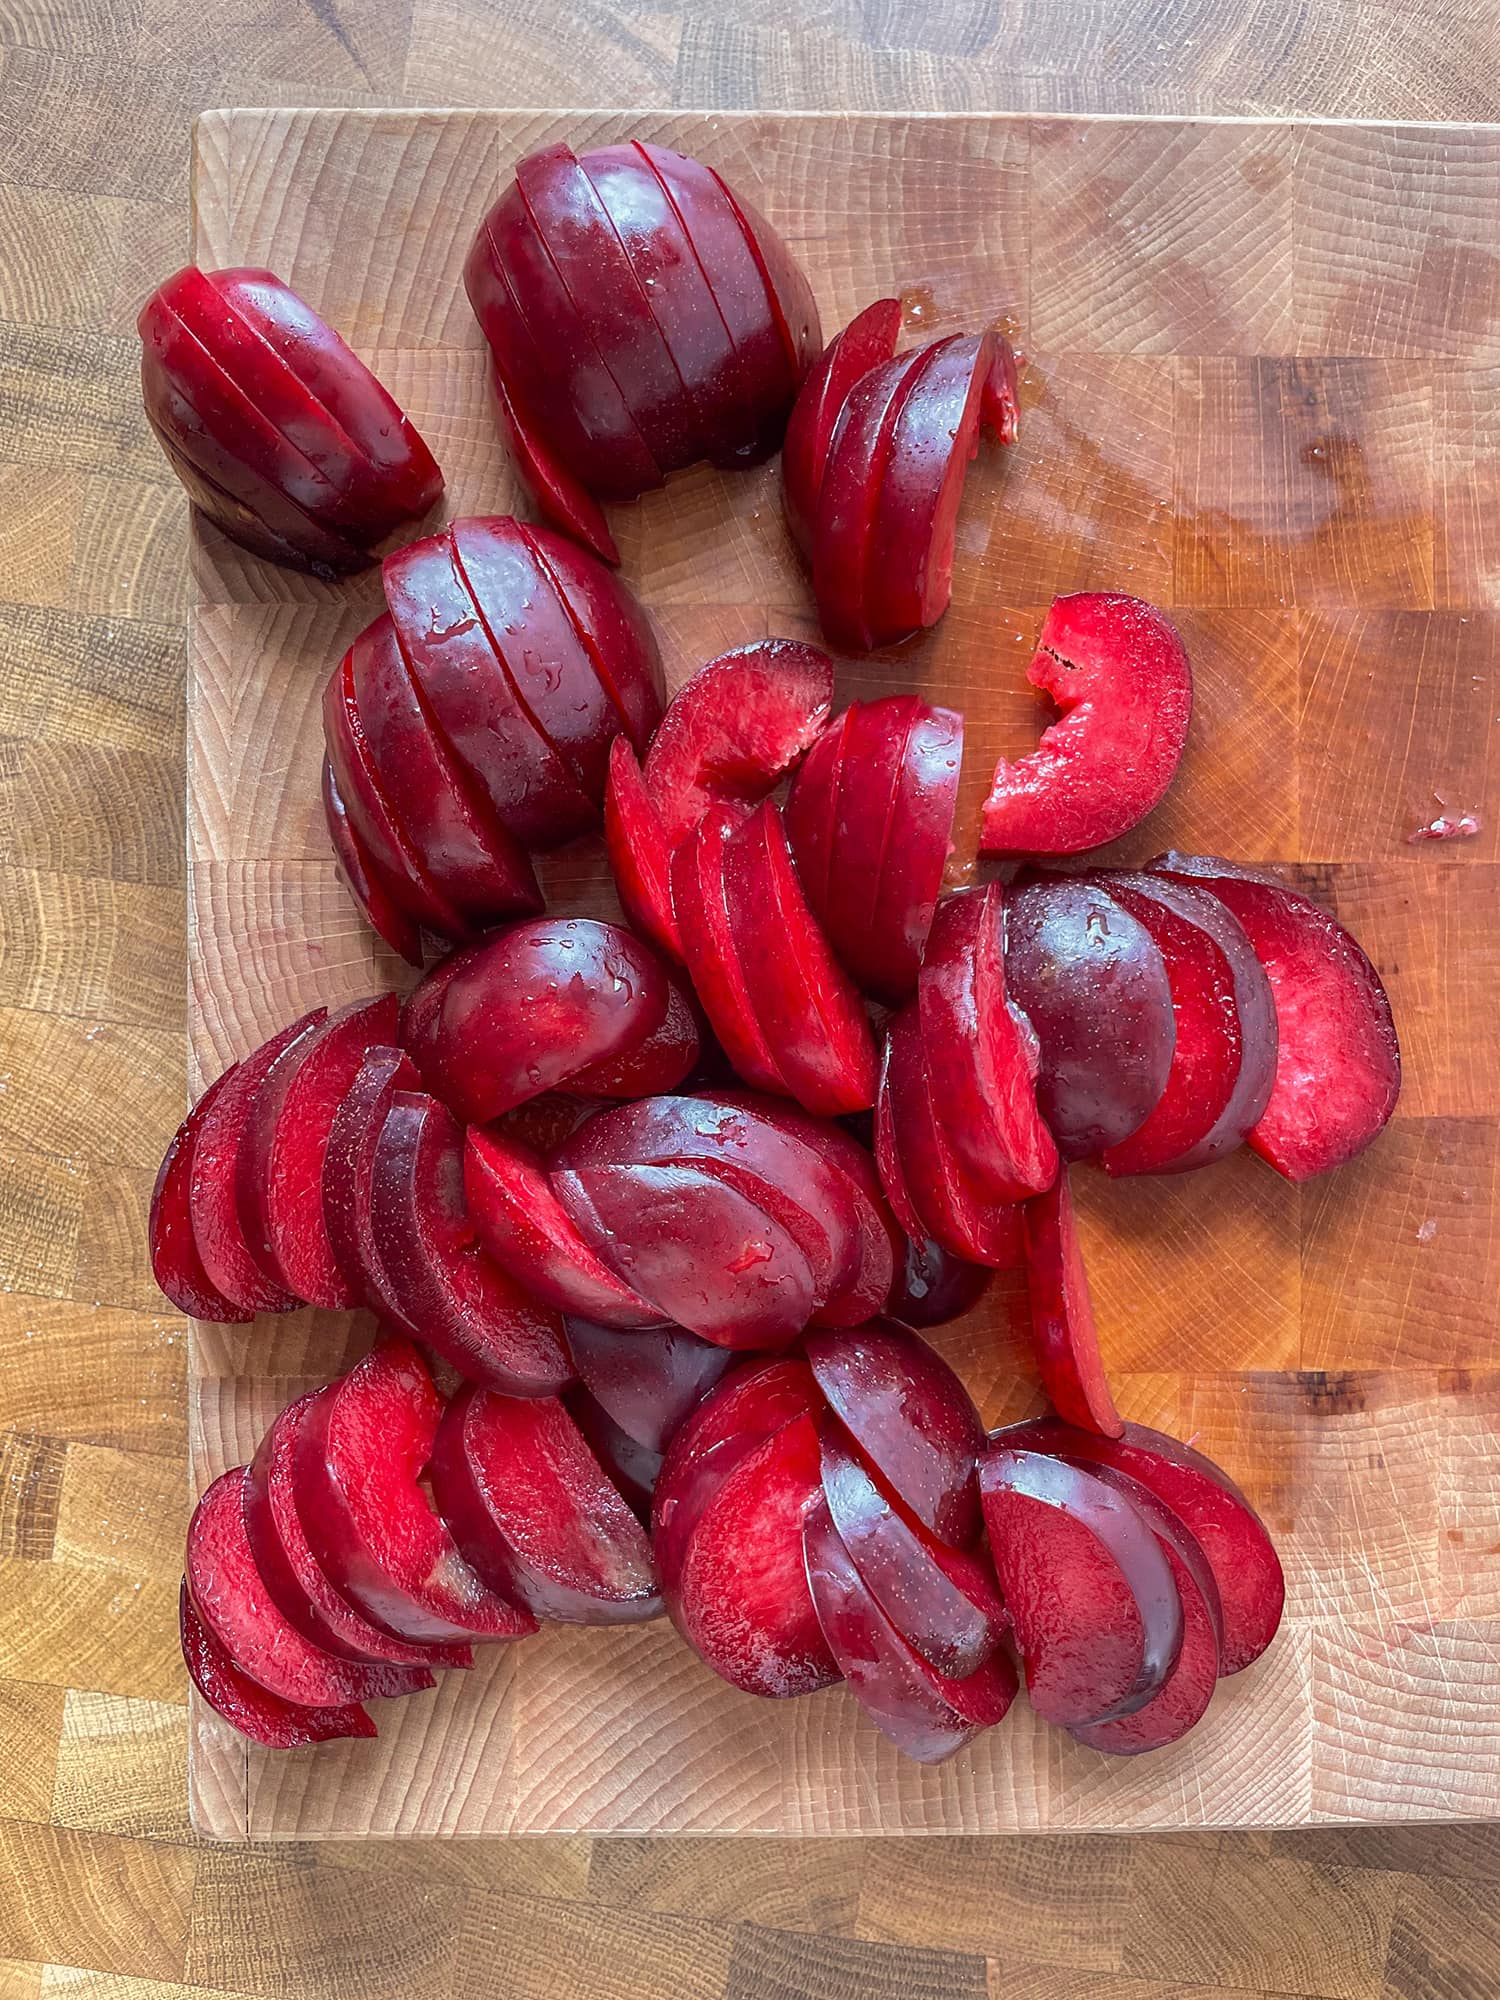 Red plums sliced into 1/2 inch slices on a wooden cutting board. 